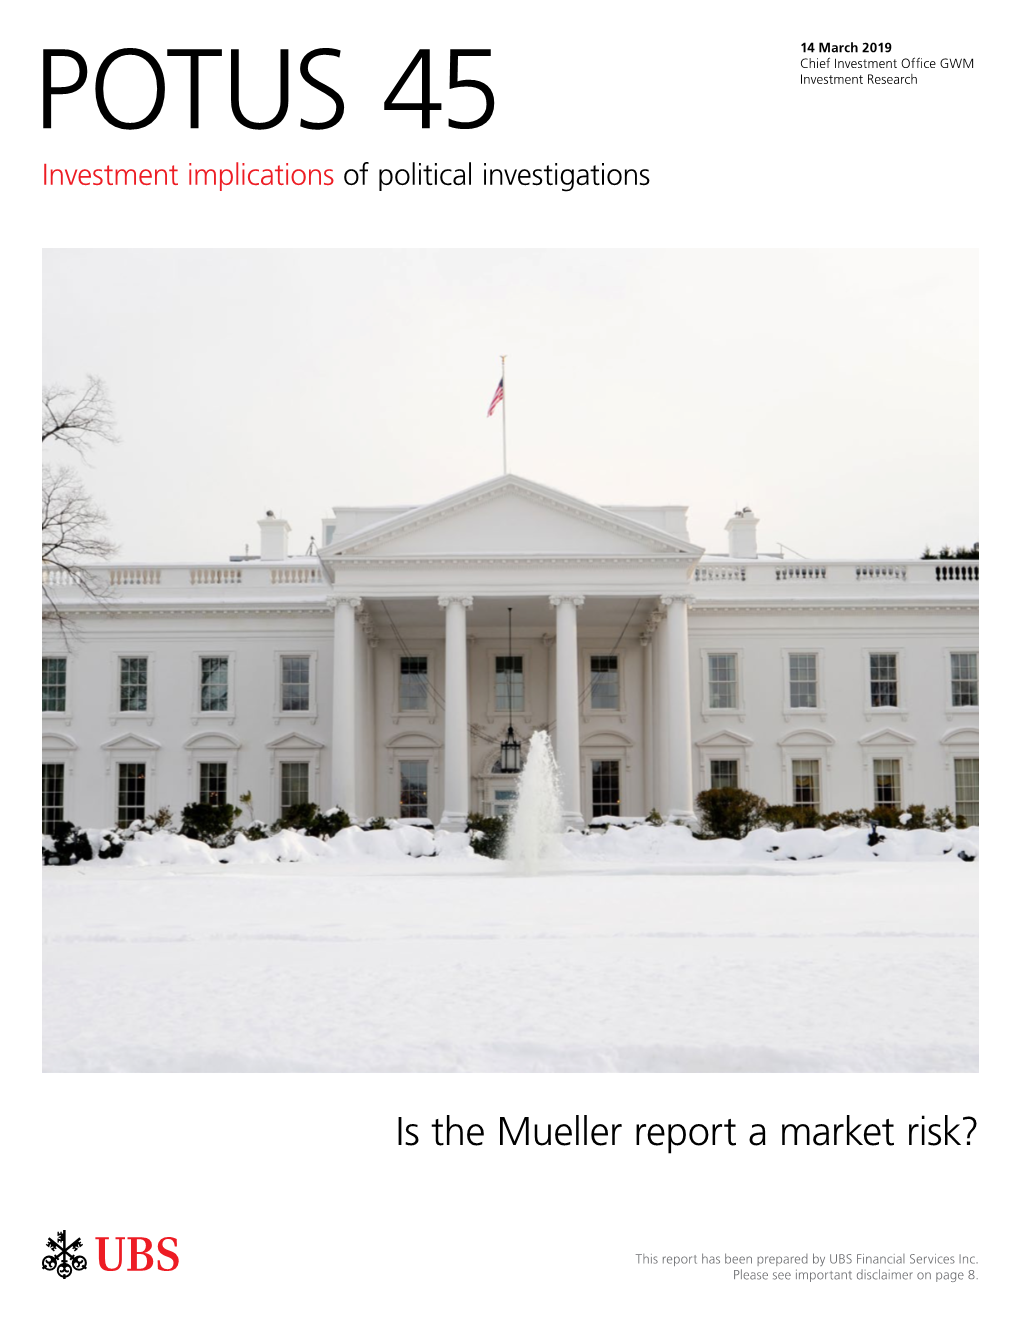 Is the Mueller Report a Market Risk?